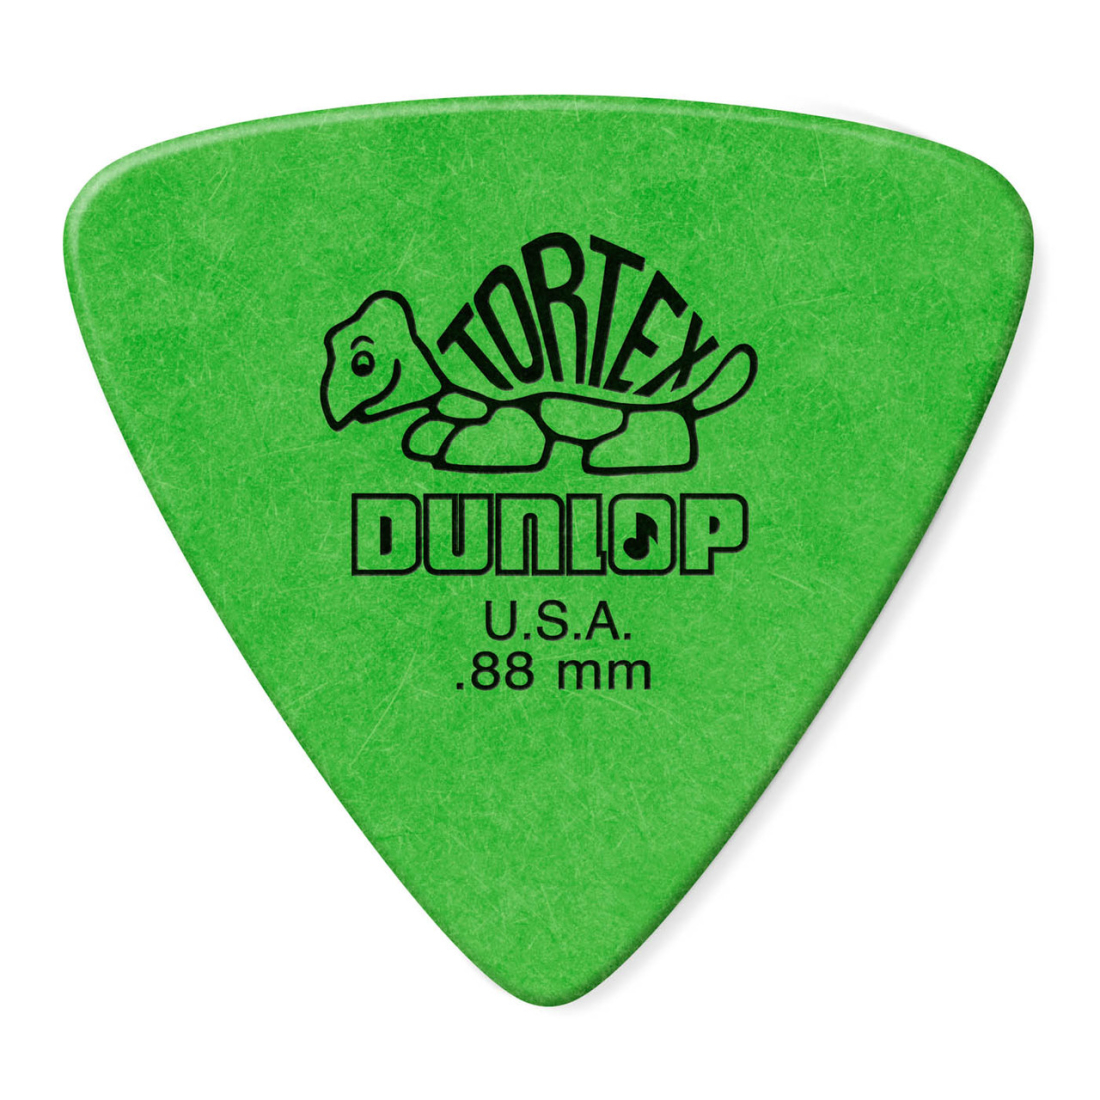 Tortex Triangle Pick Player\'s Pack (6 Pack) - 0.88 mm